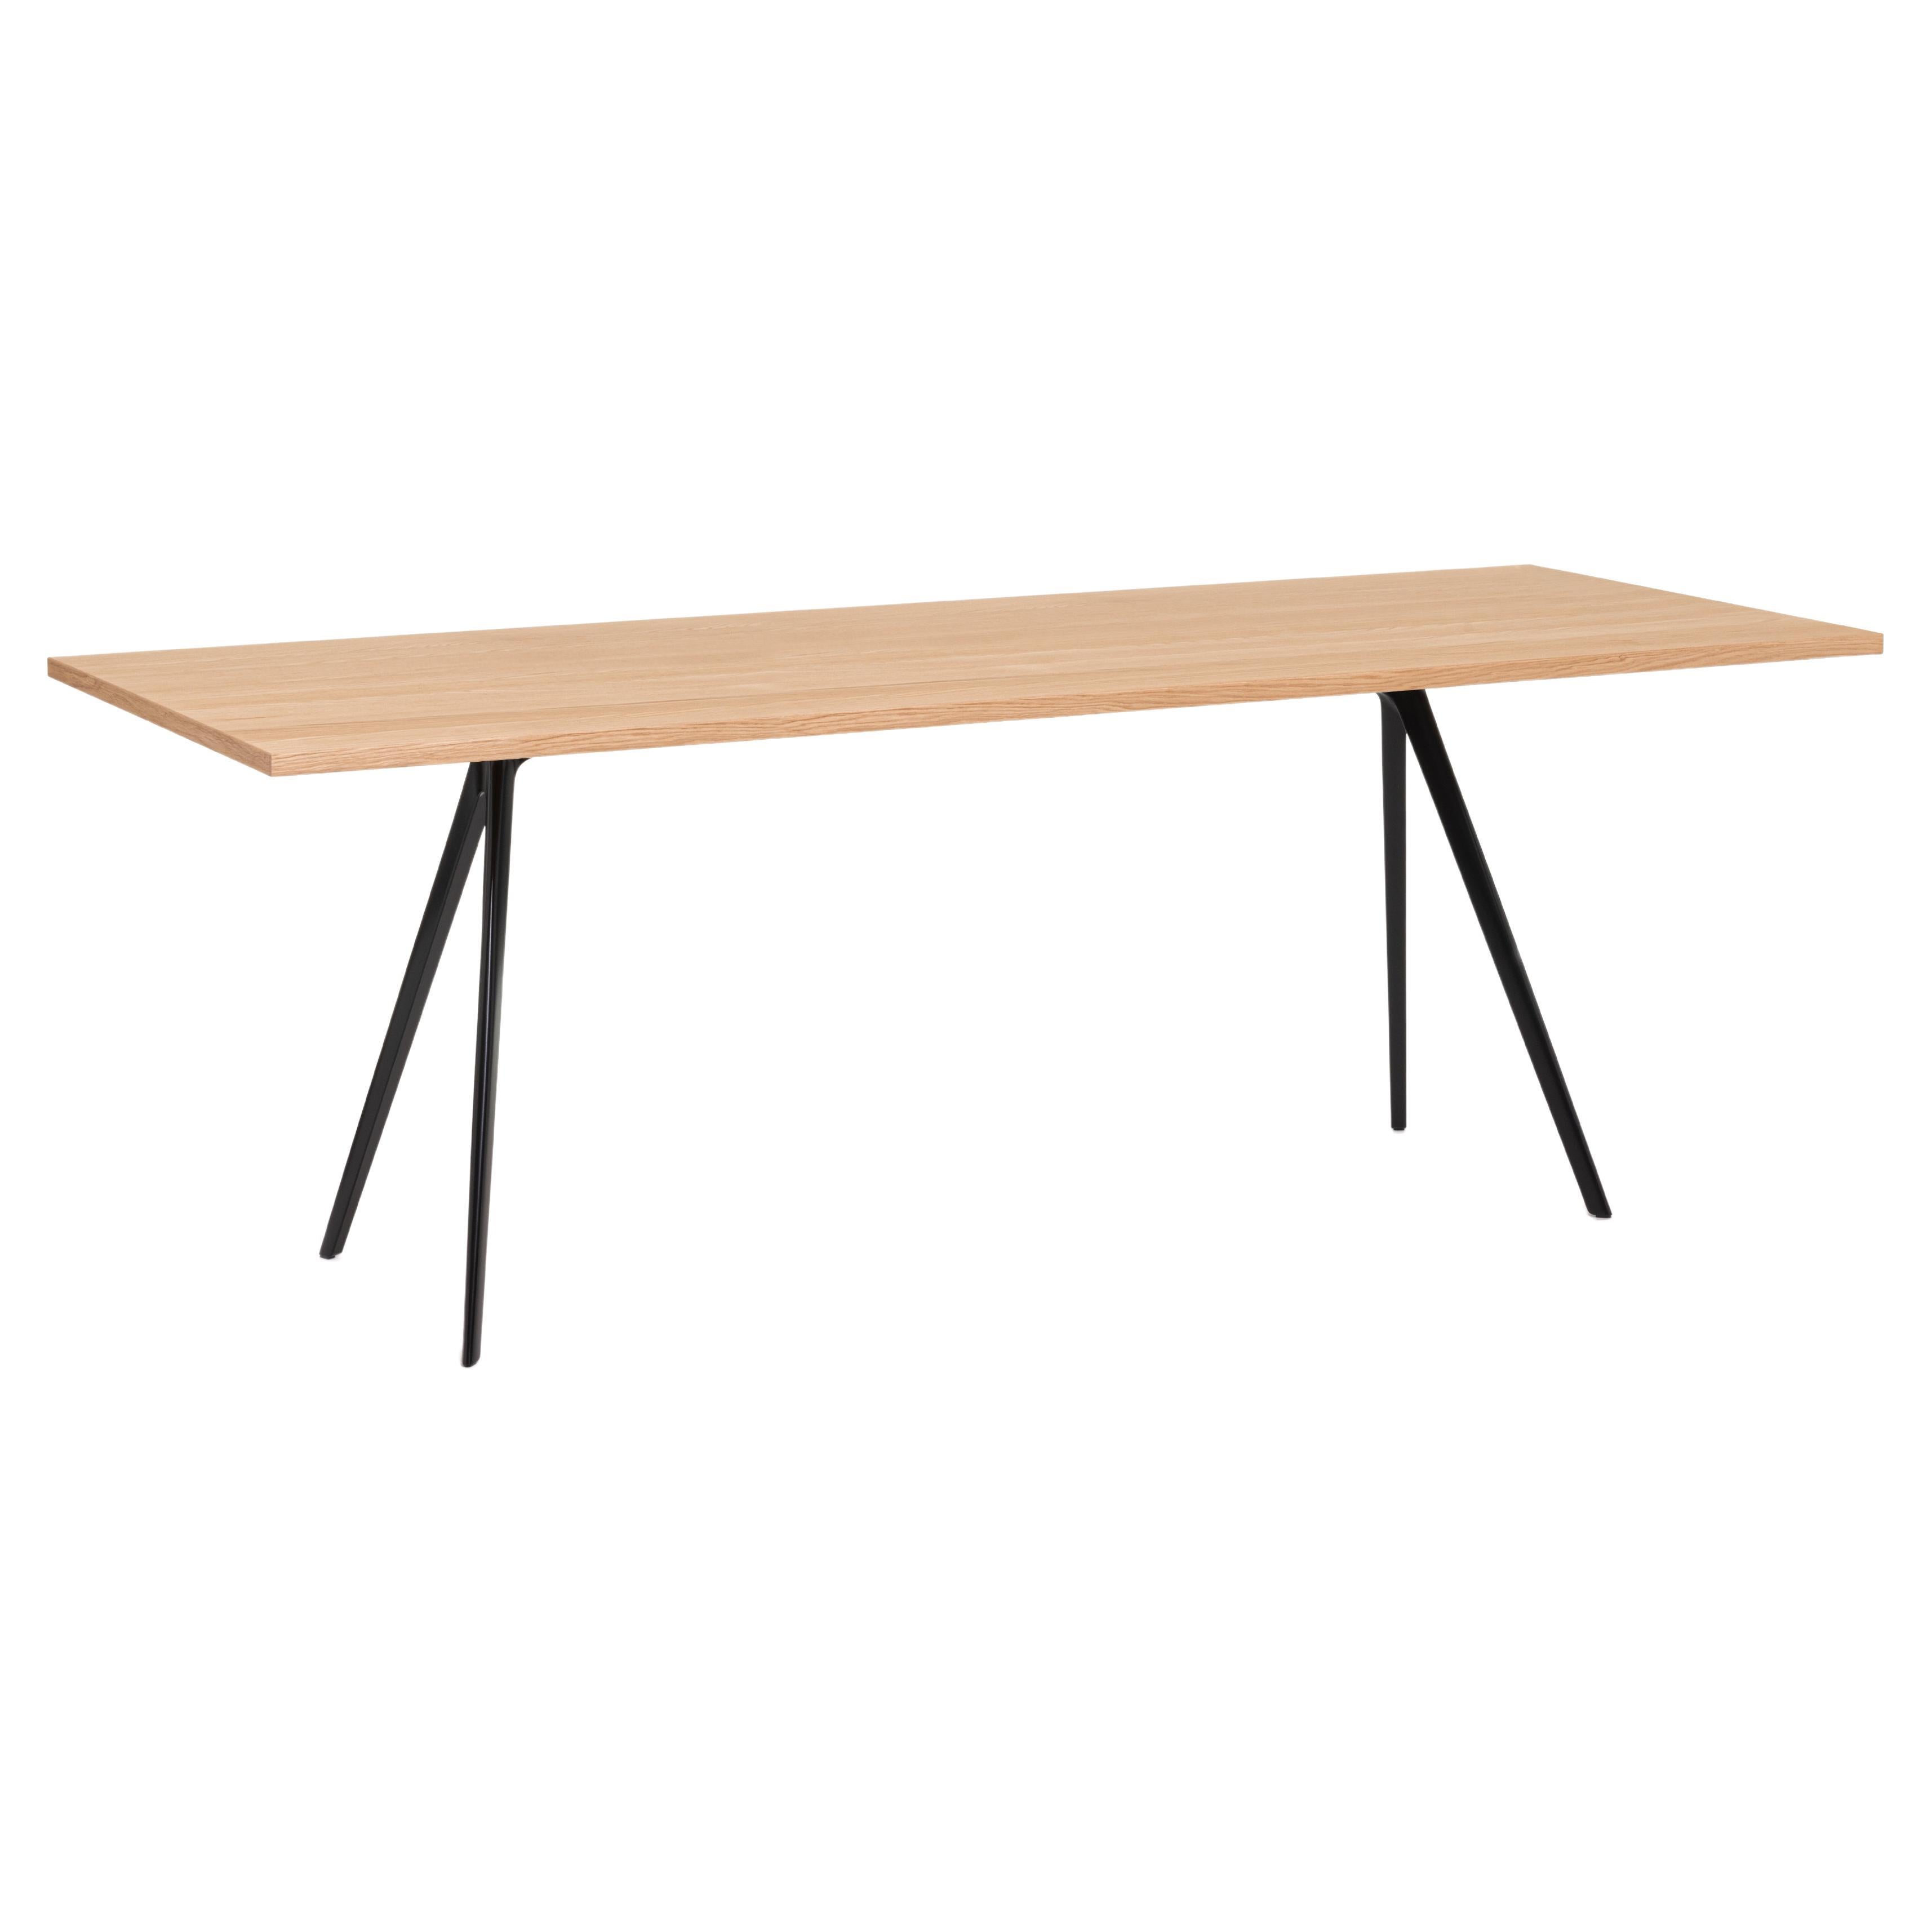 Baguette Table in Oak Top and White Frame by Ronan & Erwan Boroullec for MAGIS